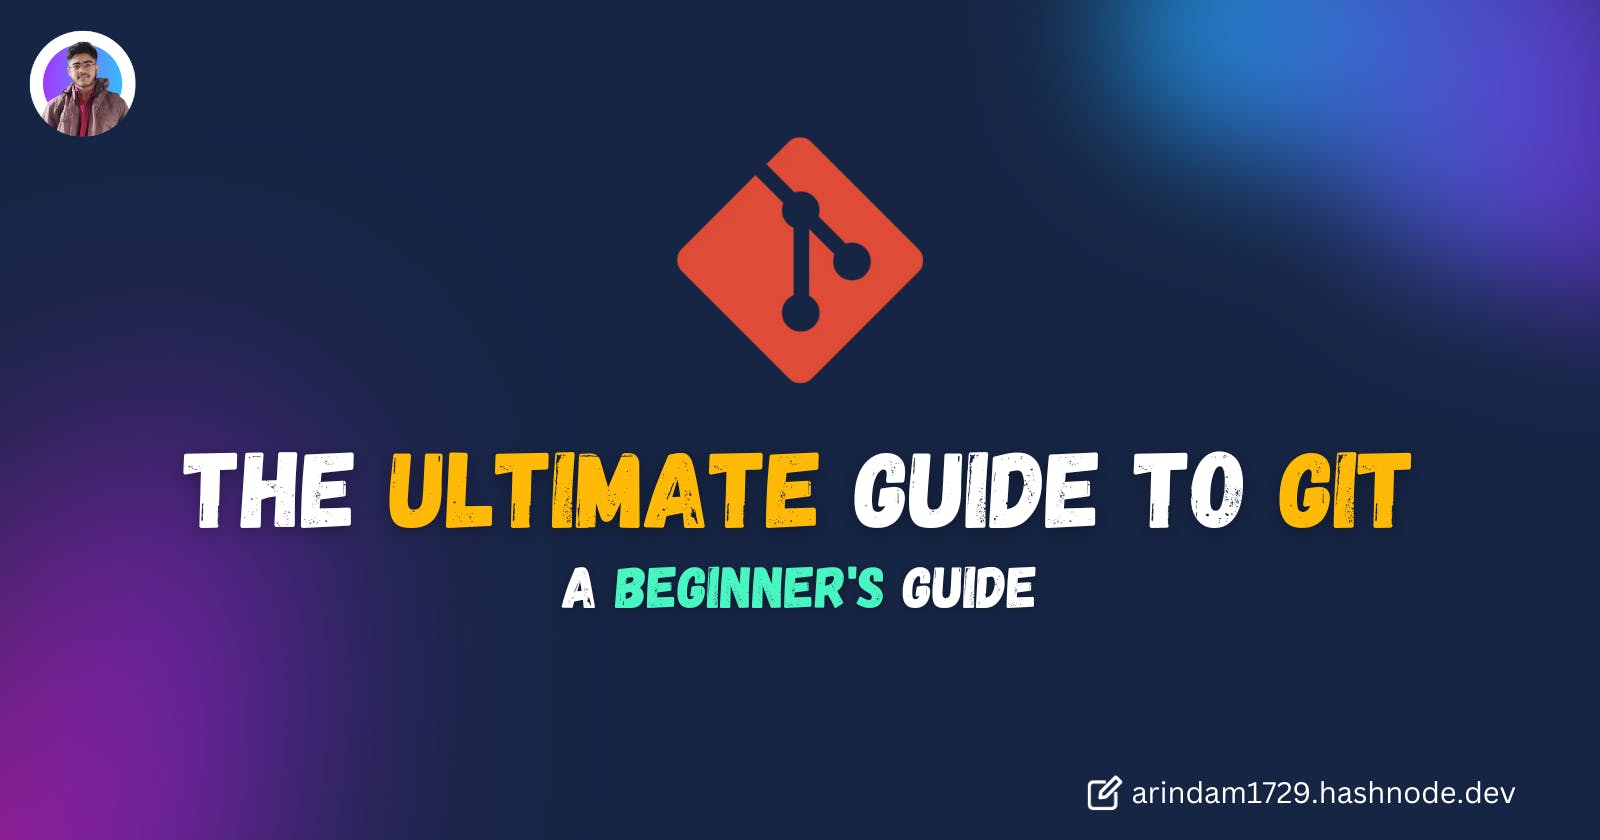 The Ultimate Guide to Git